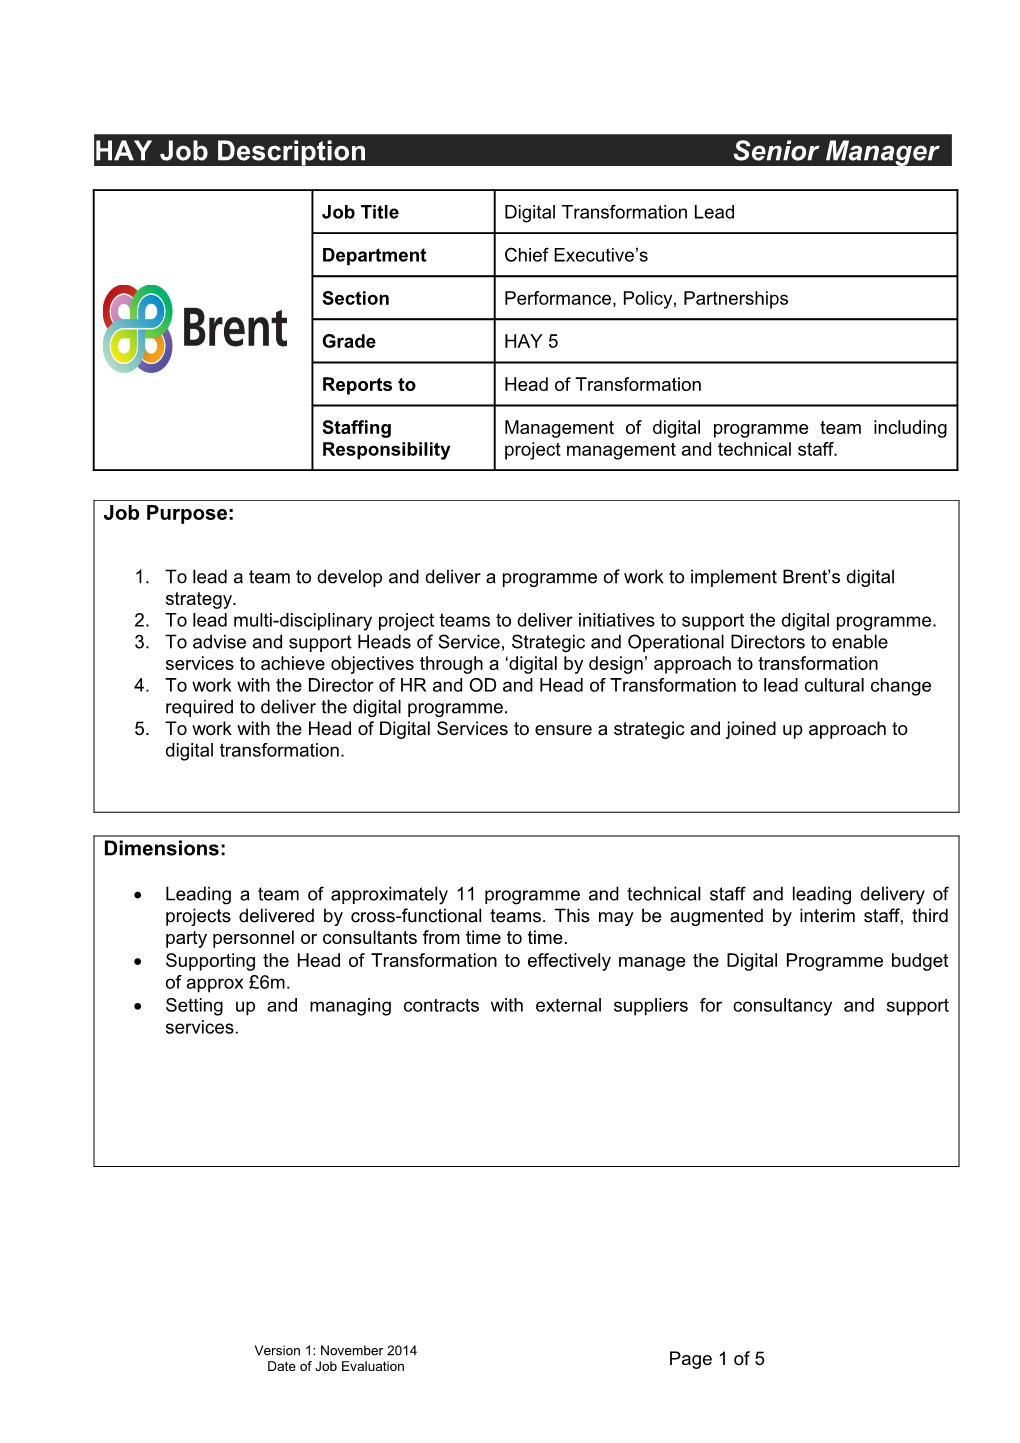 Guidance Notes for the Completion of the Job Description Questionnaire s1